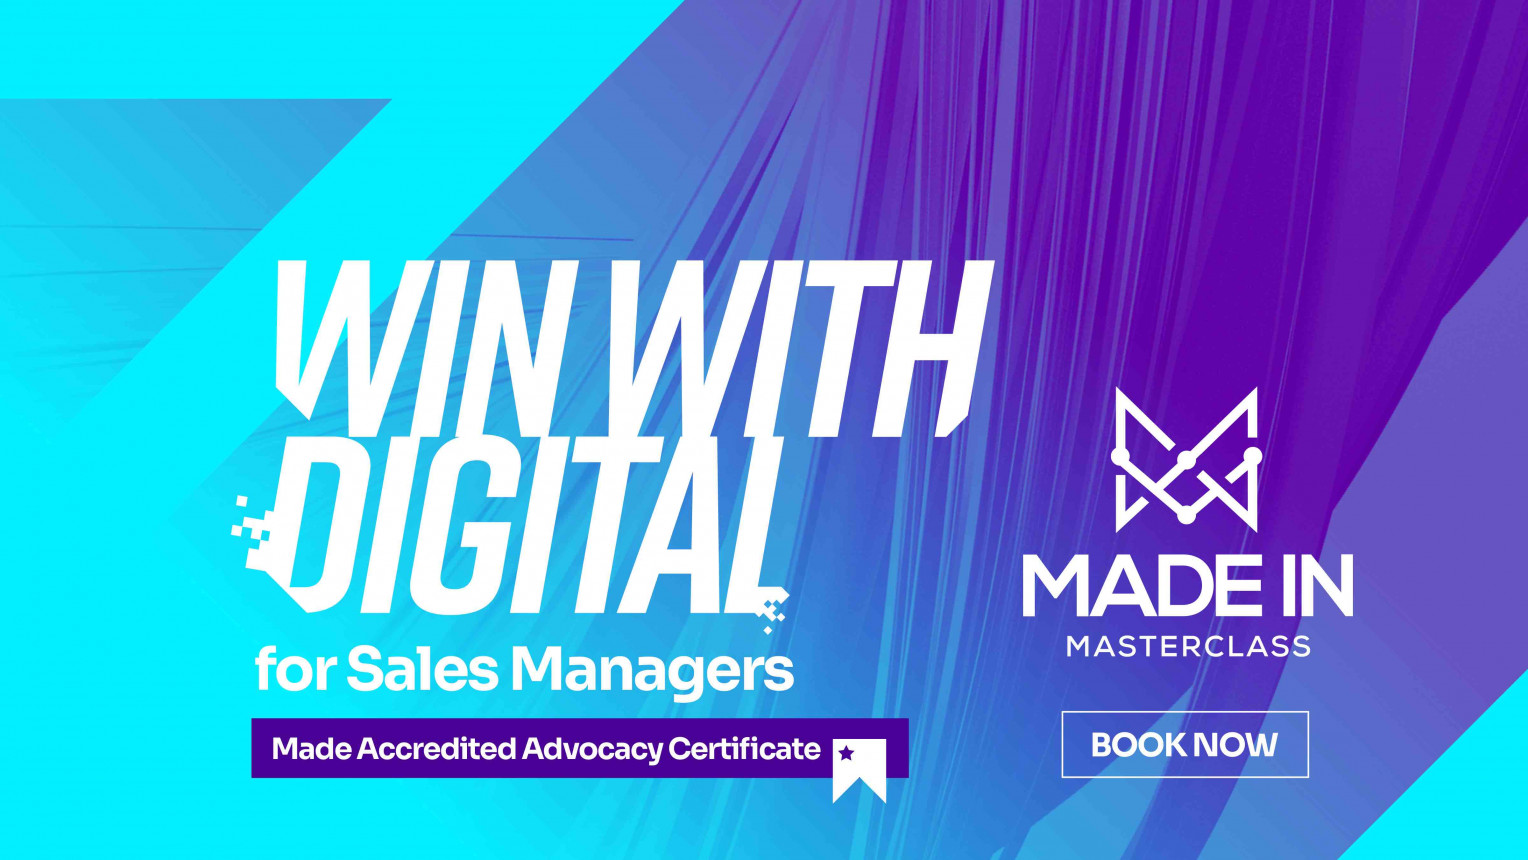 Made Masterclass for Sales Managers